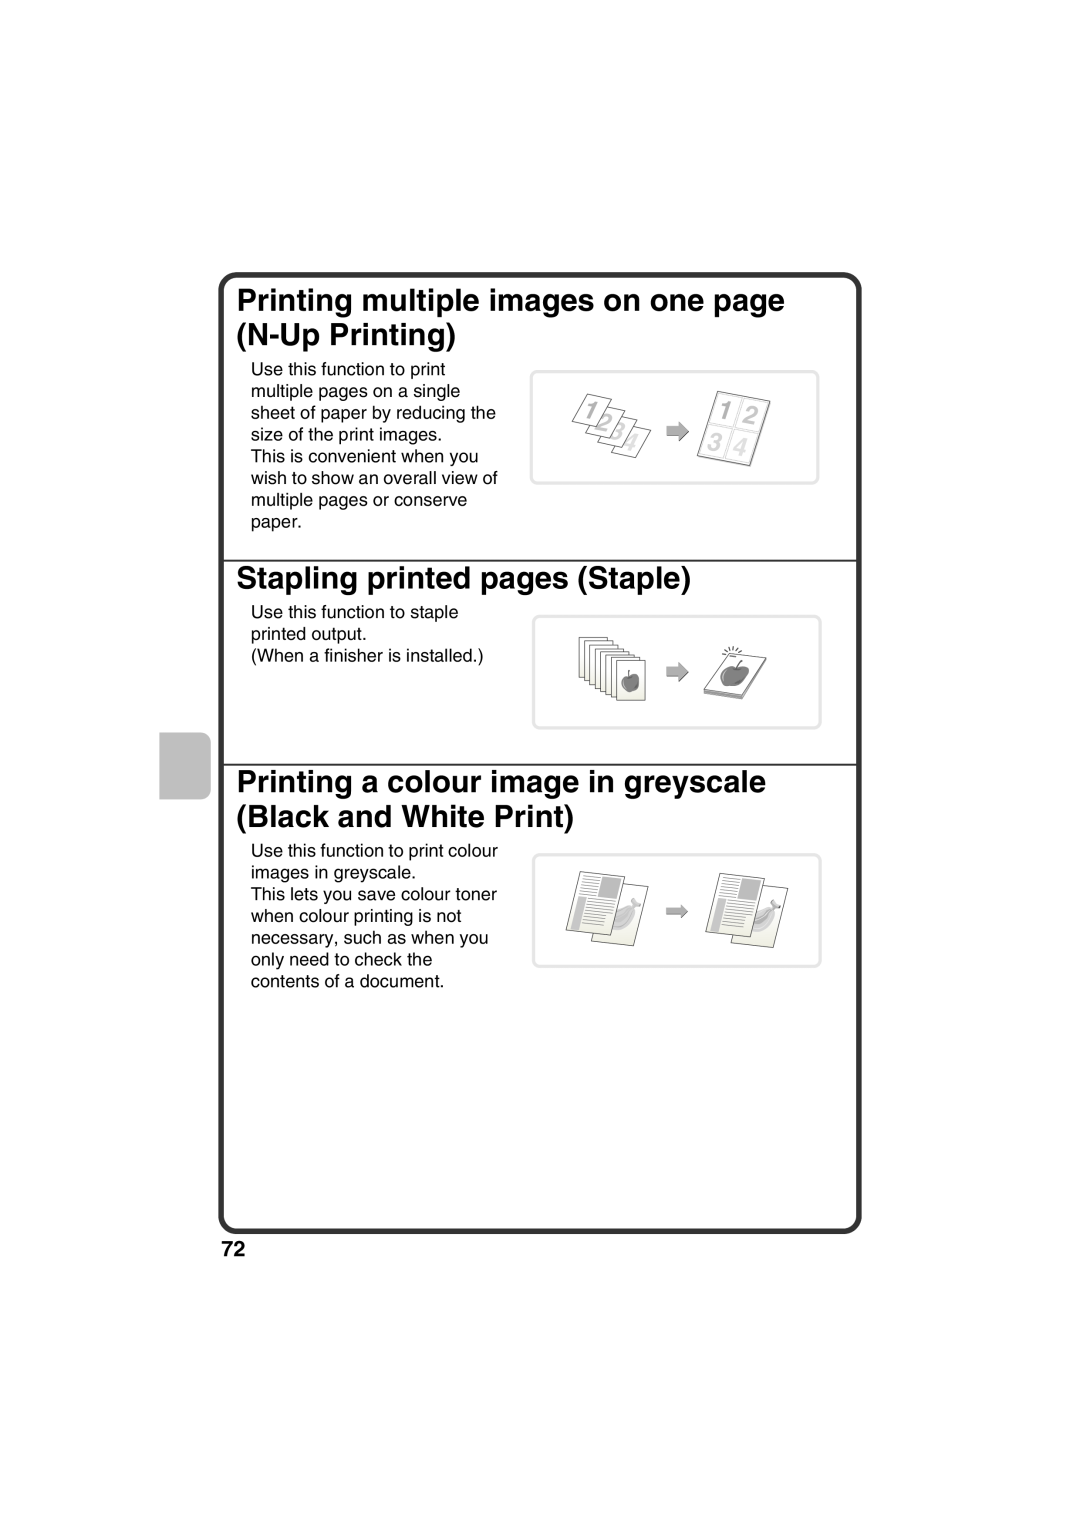 Sharp MX-C311, MX-C381 quick start Printing multiple images on one page N-Up Printing, Stapling printed pages Staple 